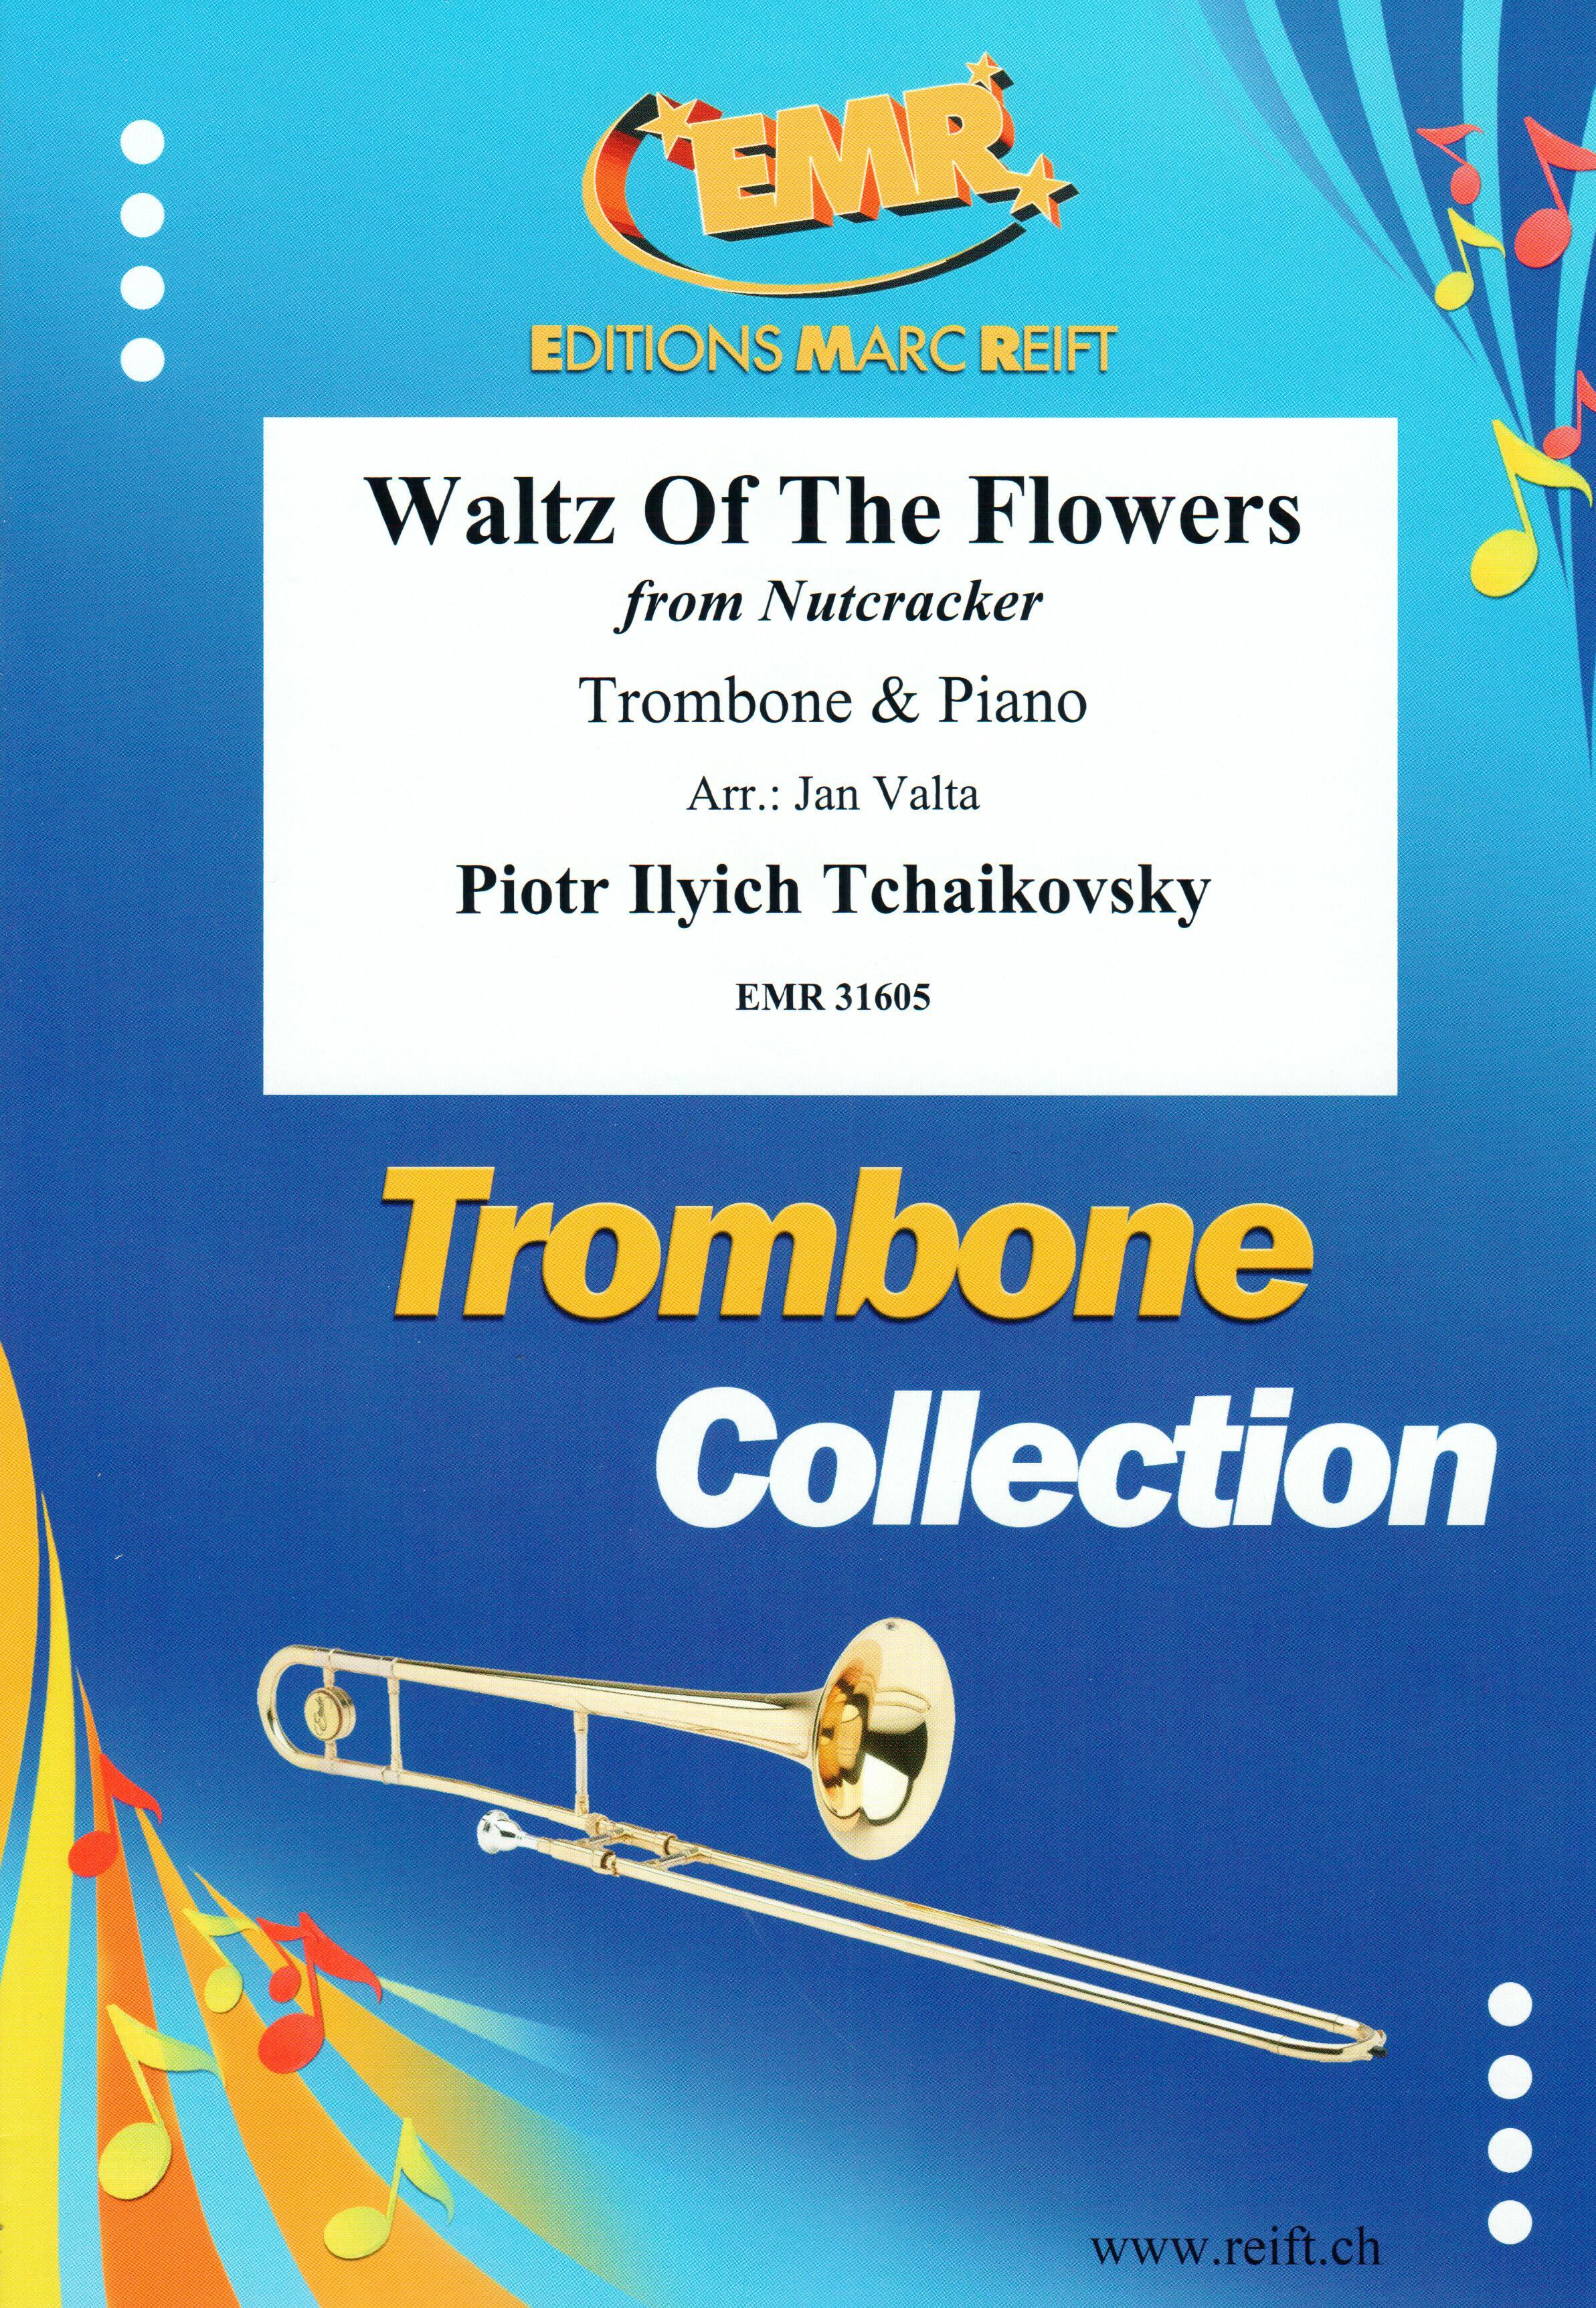 WALTZ OF THE FLOWERS